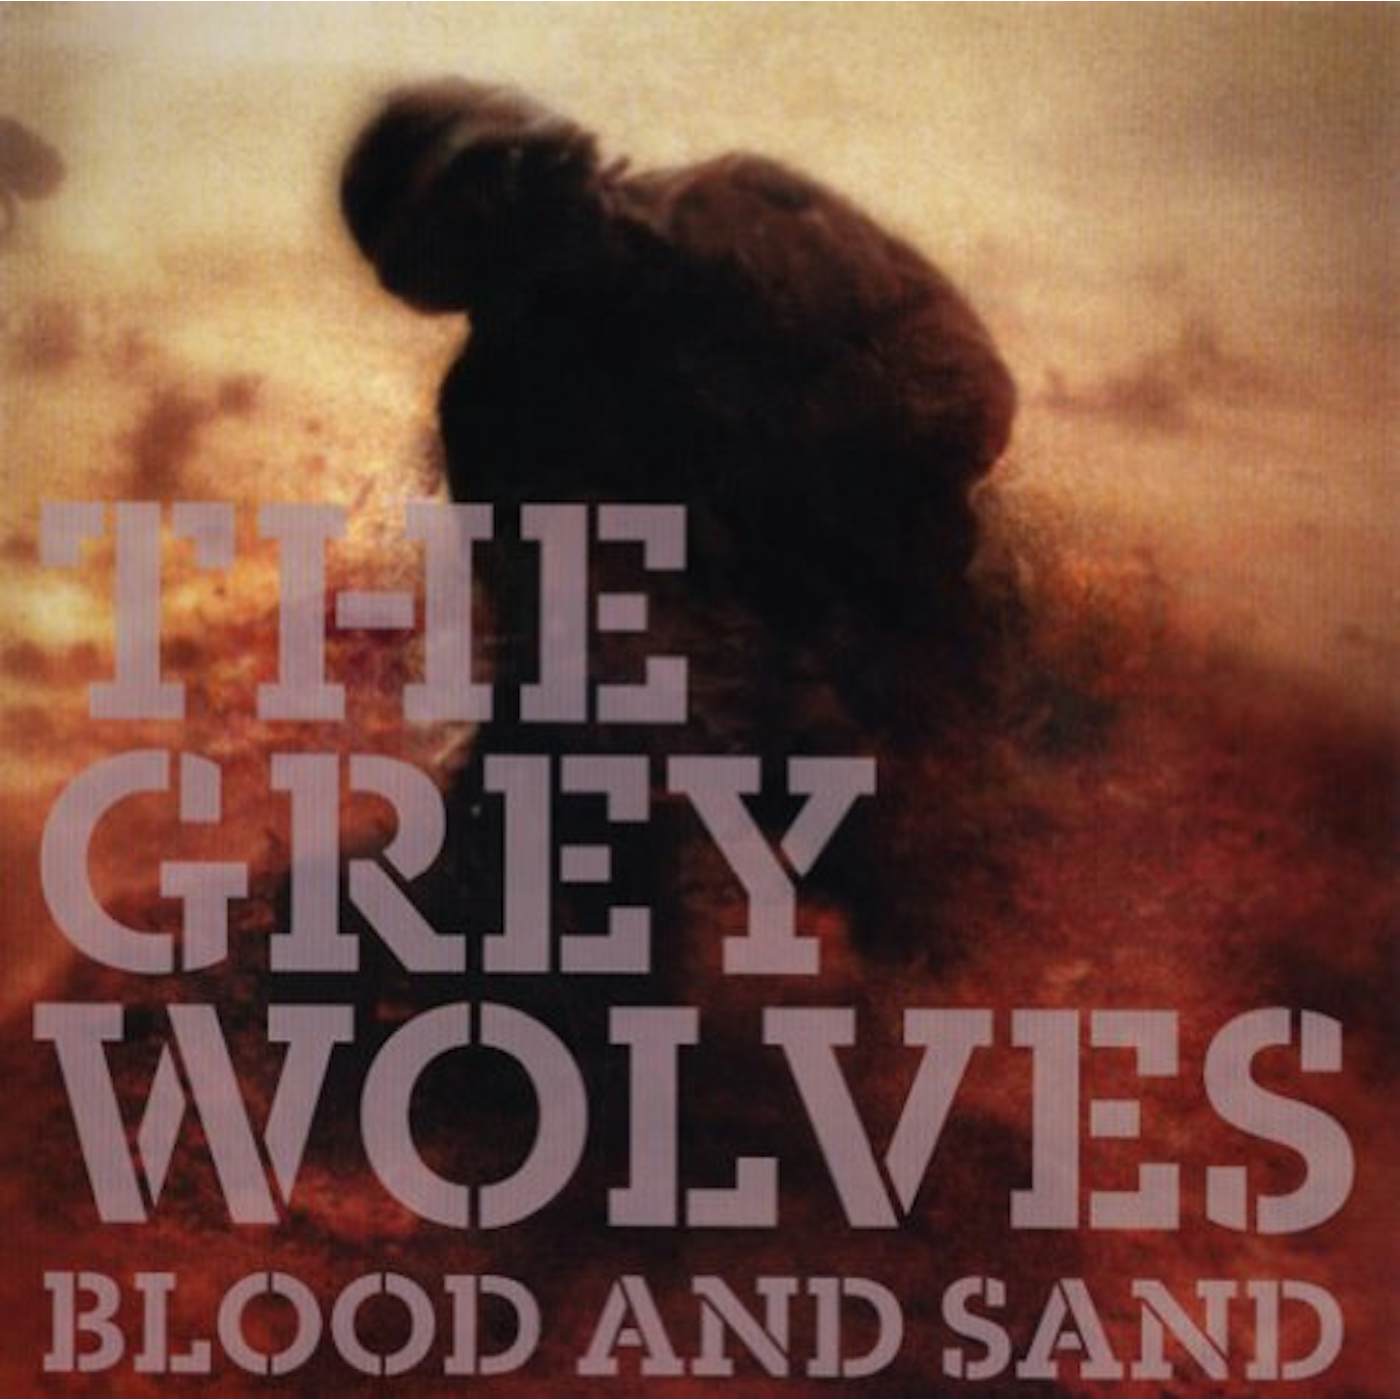 The Grey Wolves Blood And Sand Vinyl Record